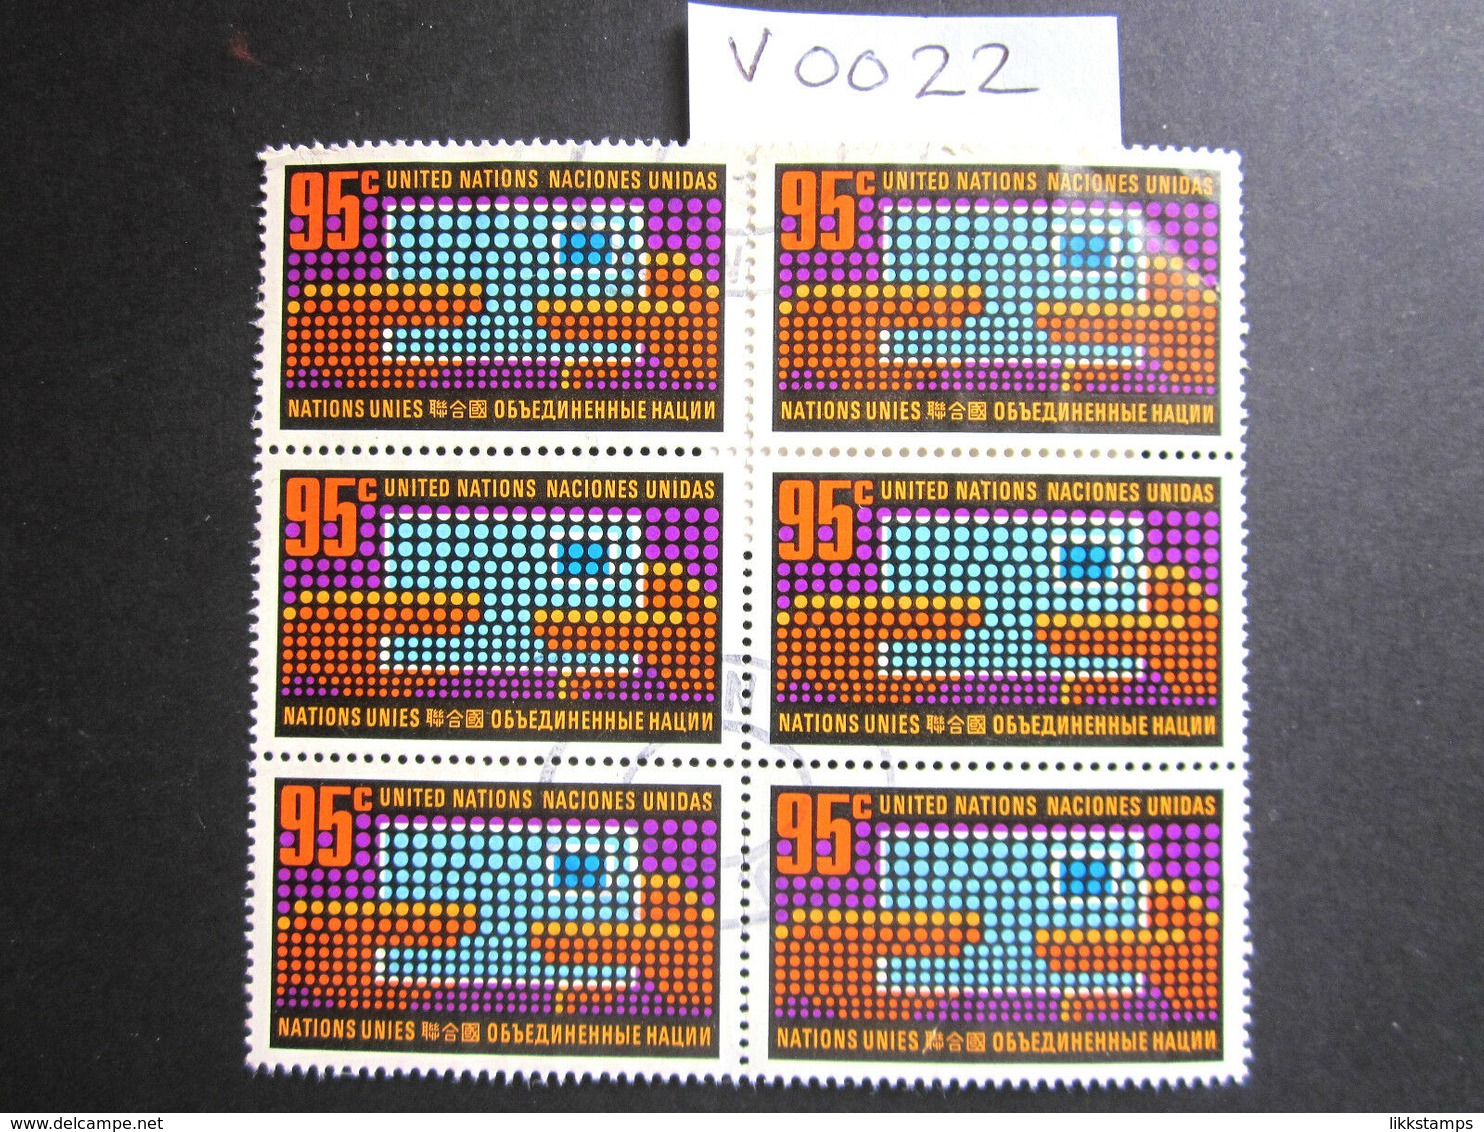 1971 A FINE USED BLOCK OF 6 "SG 224" PICTORIAL UNITED NATIONS USED STAMPS ( V0022 ) #00350 - Colecciones & Series